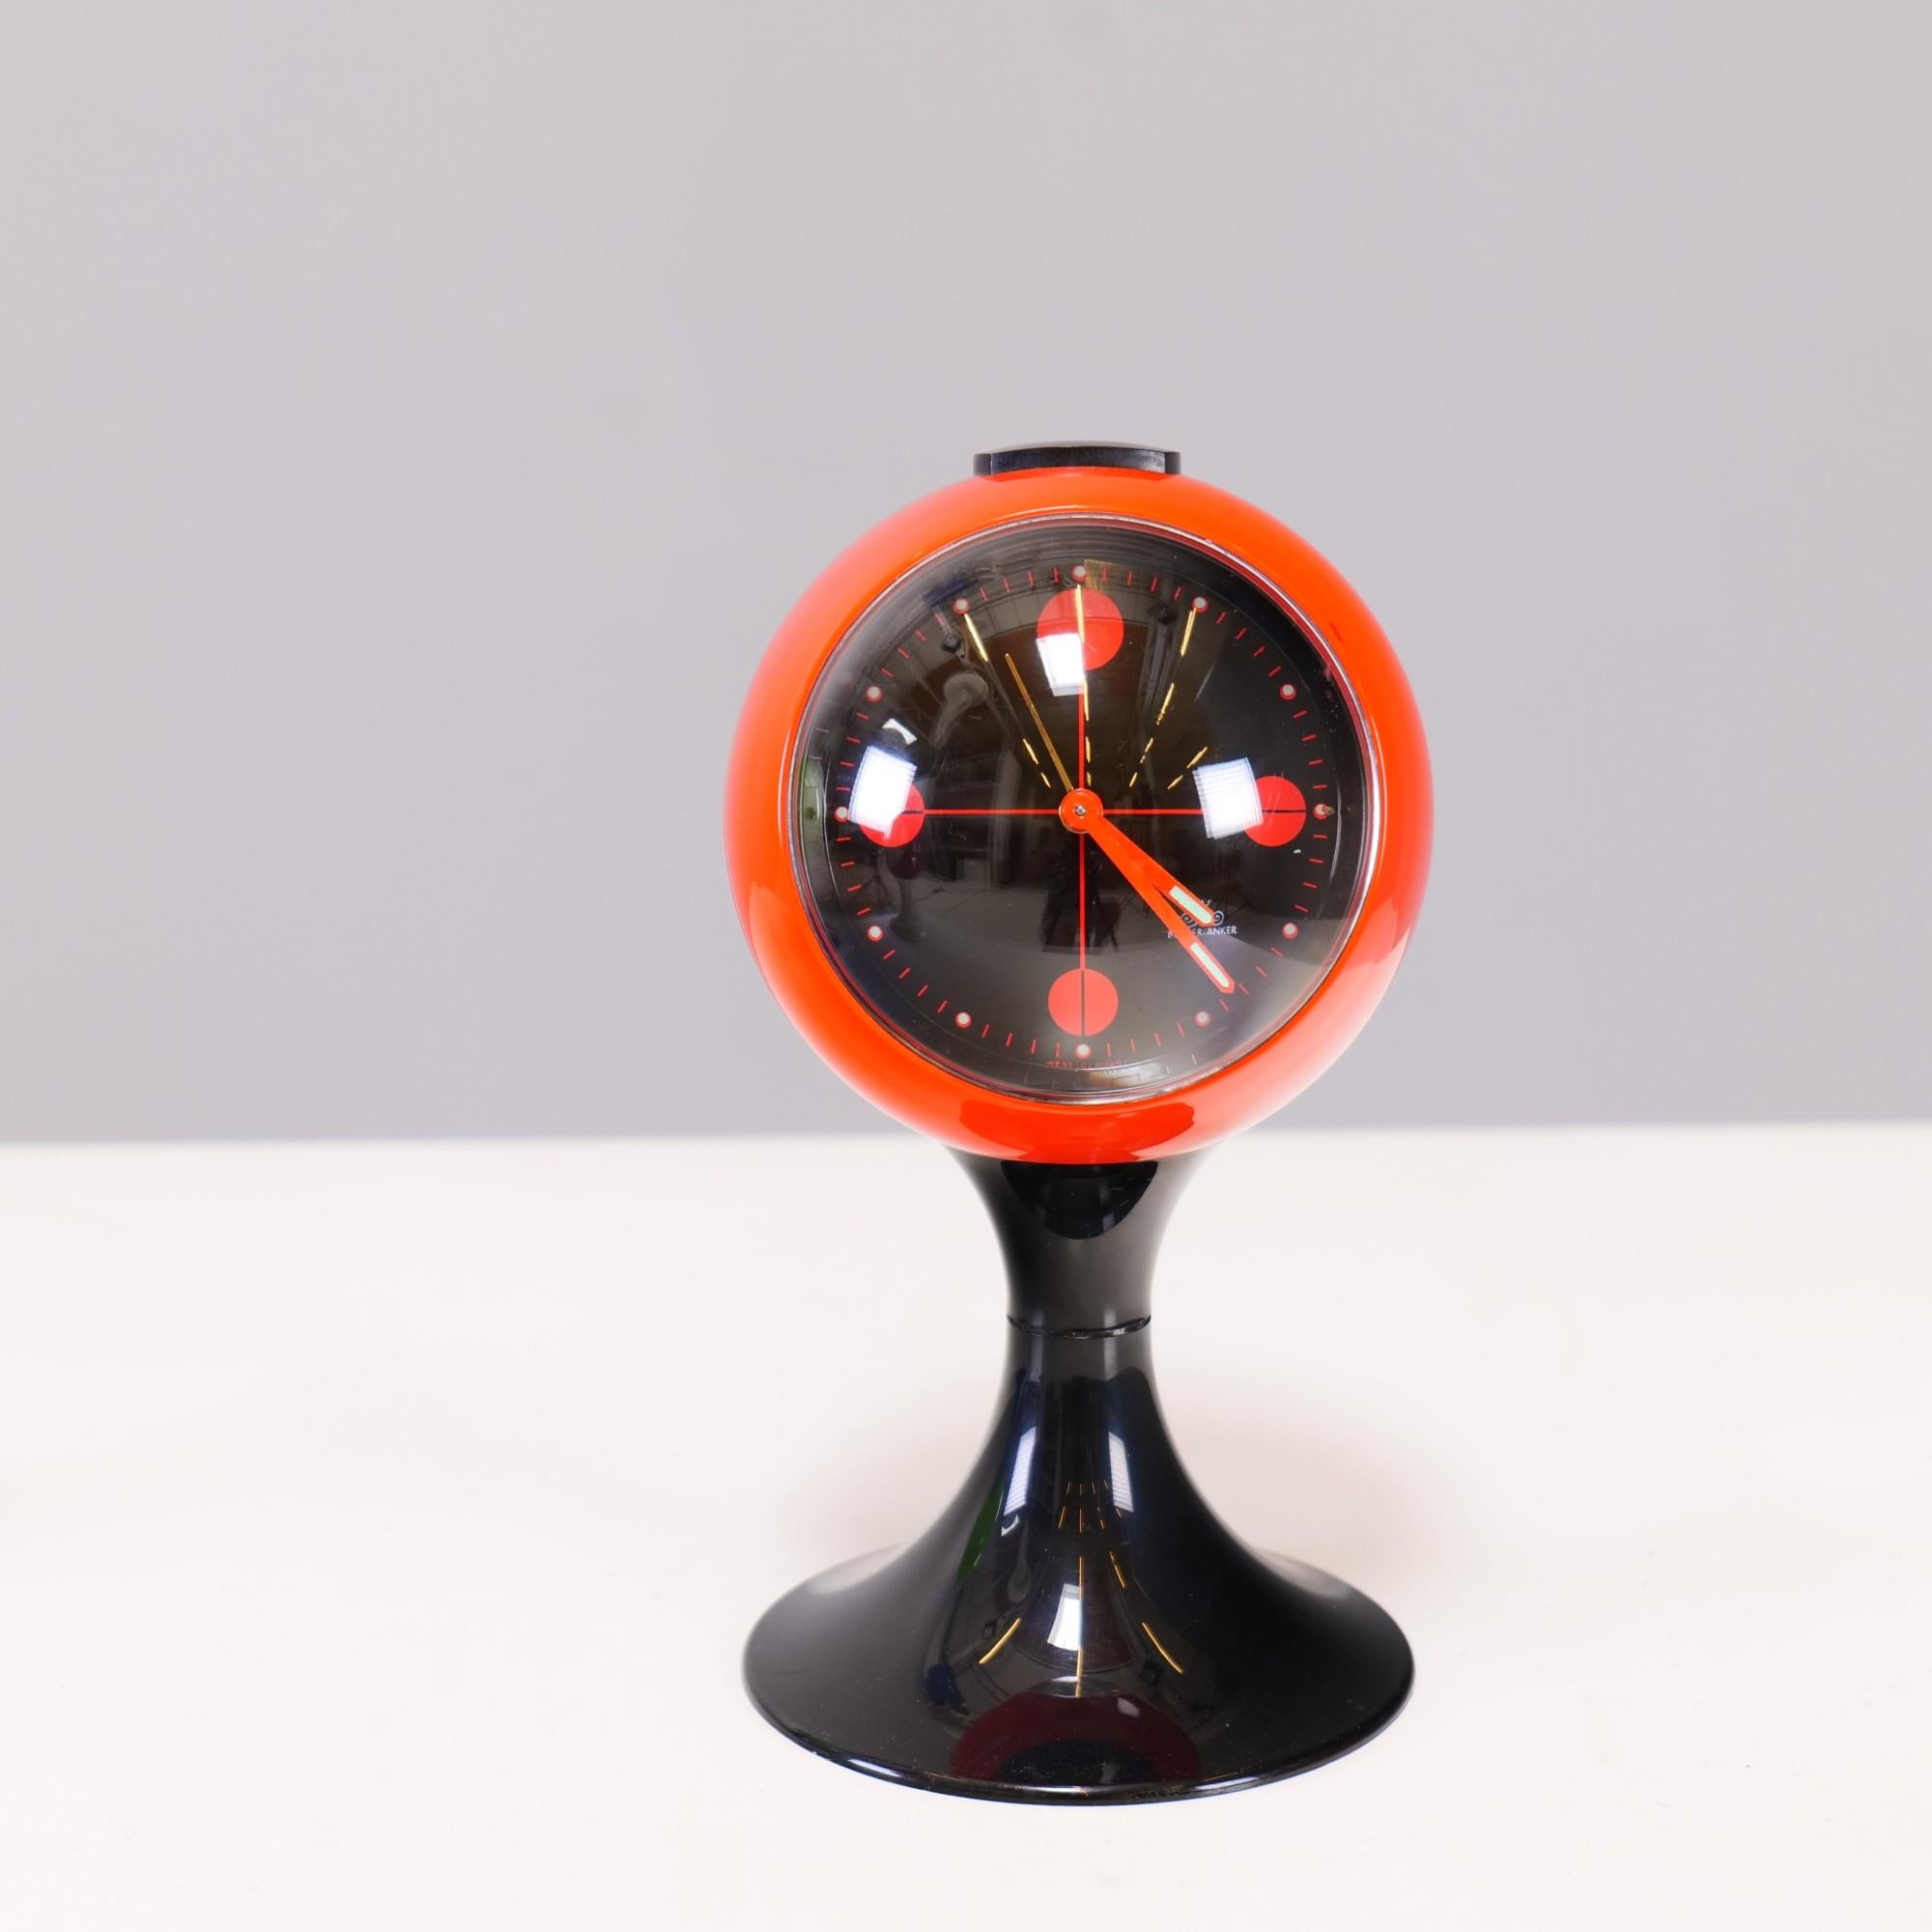 Late 20th Century Space Age Ball Design Table Clock with Alarm Function